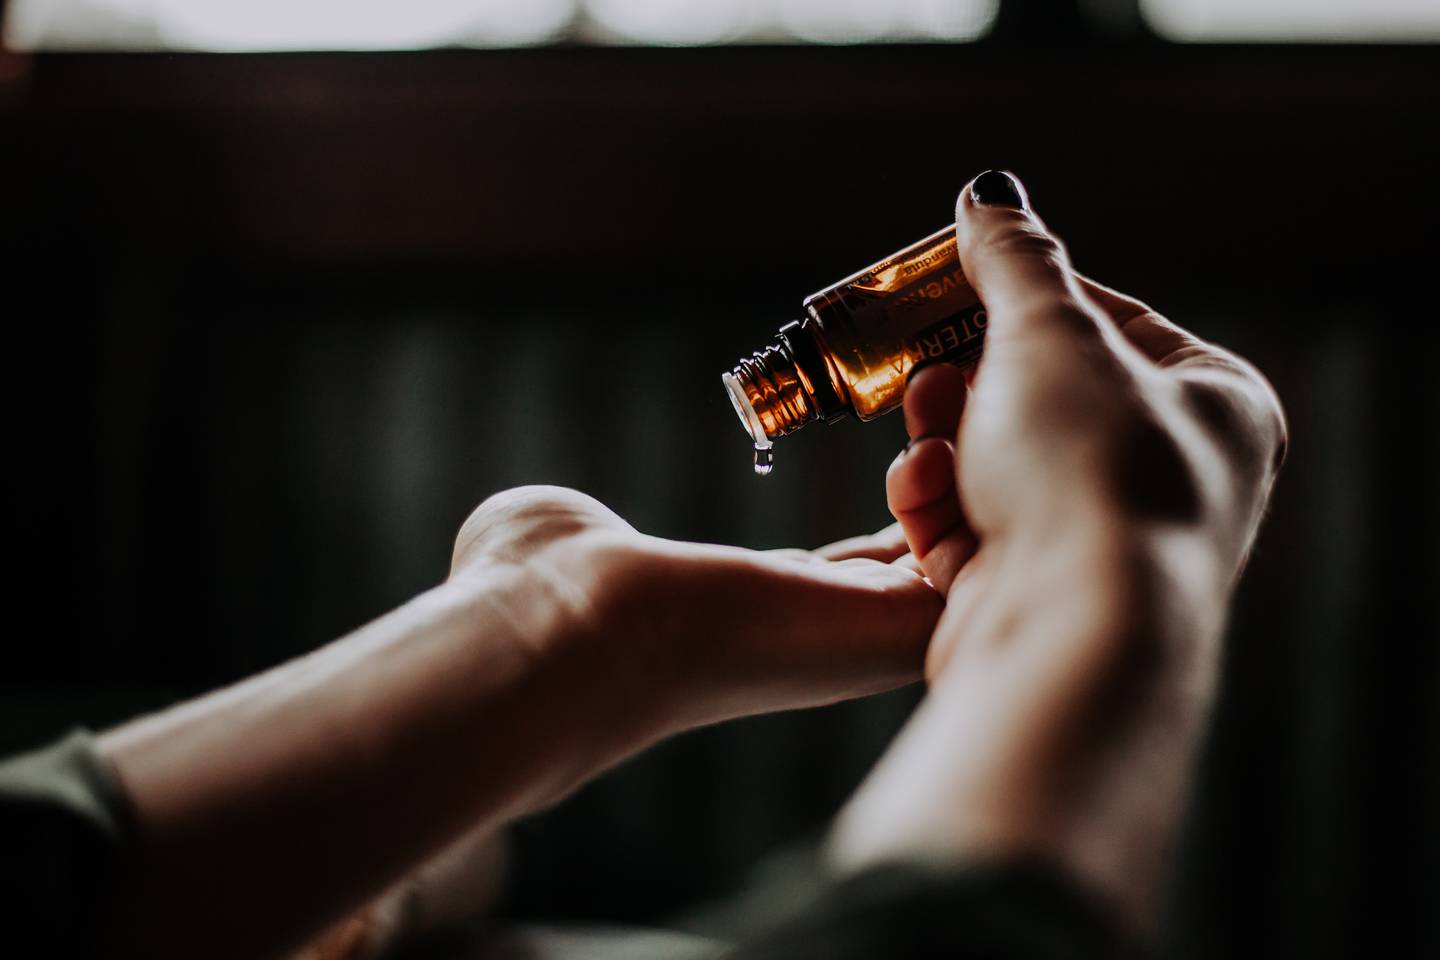 Skin flooding is a popular routine, which involves layering on various hydrating products. Photo: Christin Hume / Unsplash